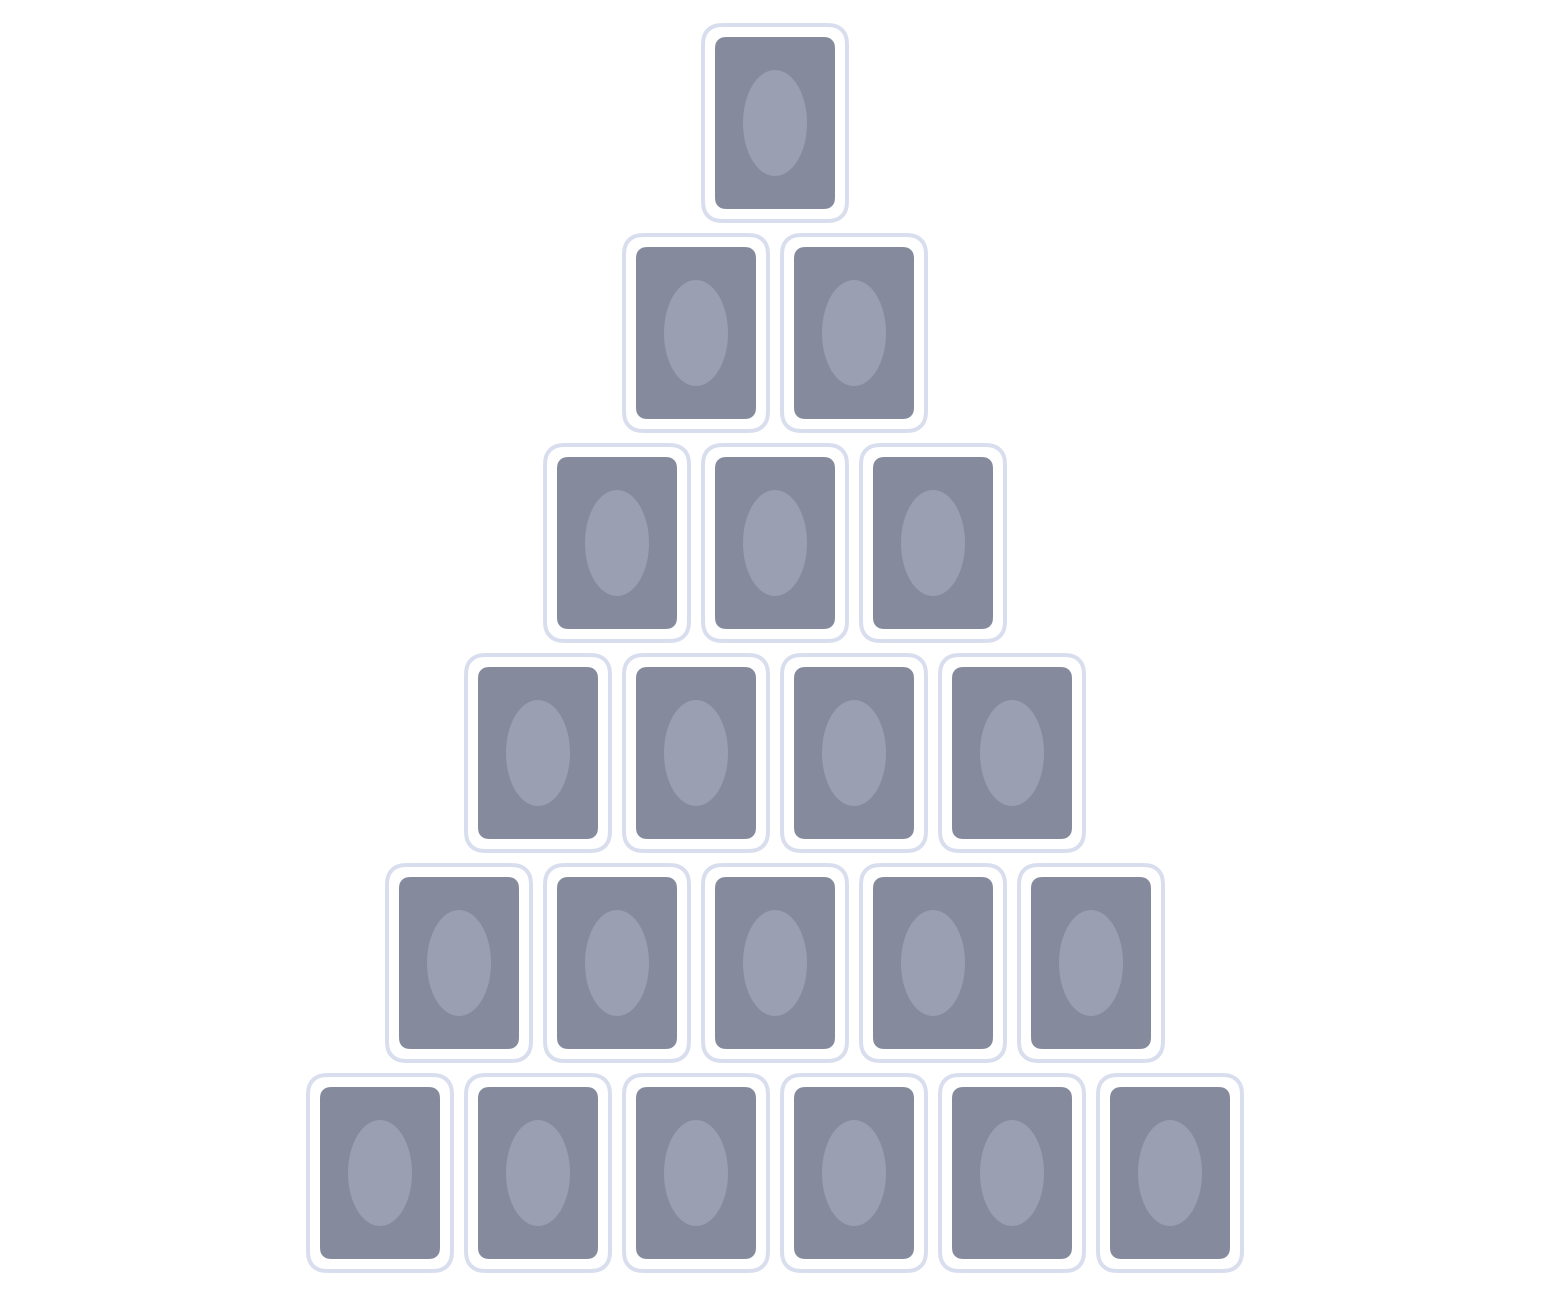 layout for the card game Pyramid